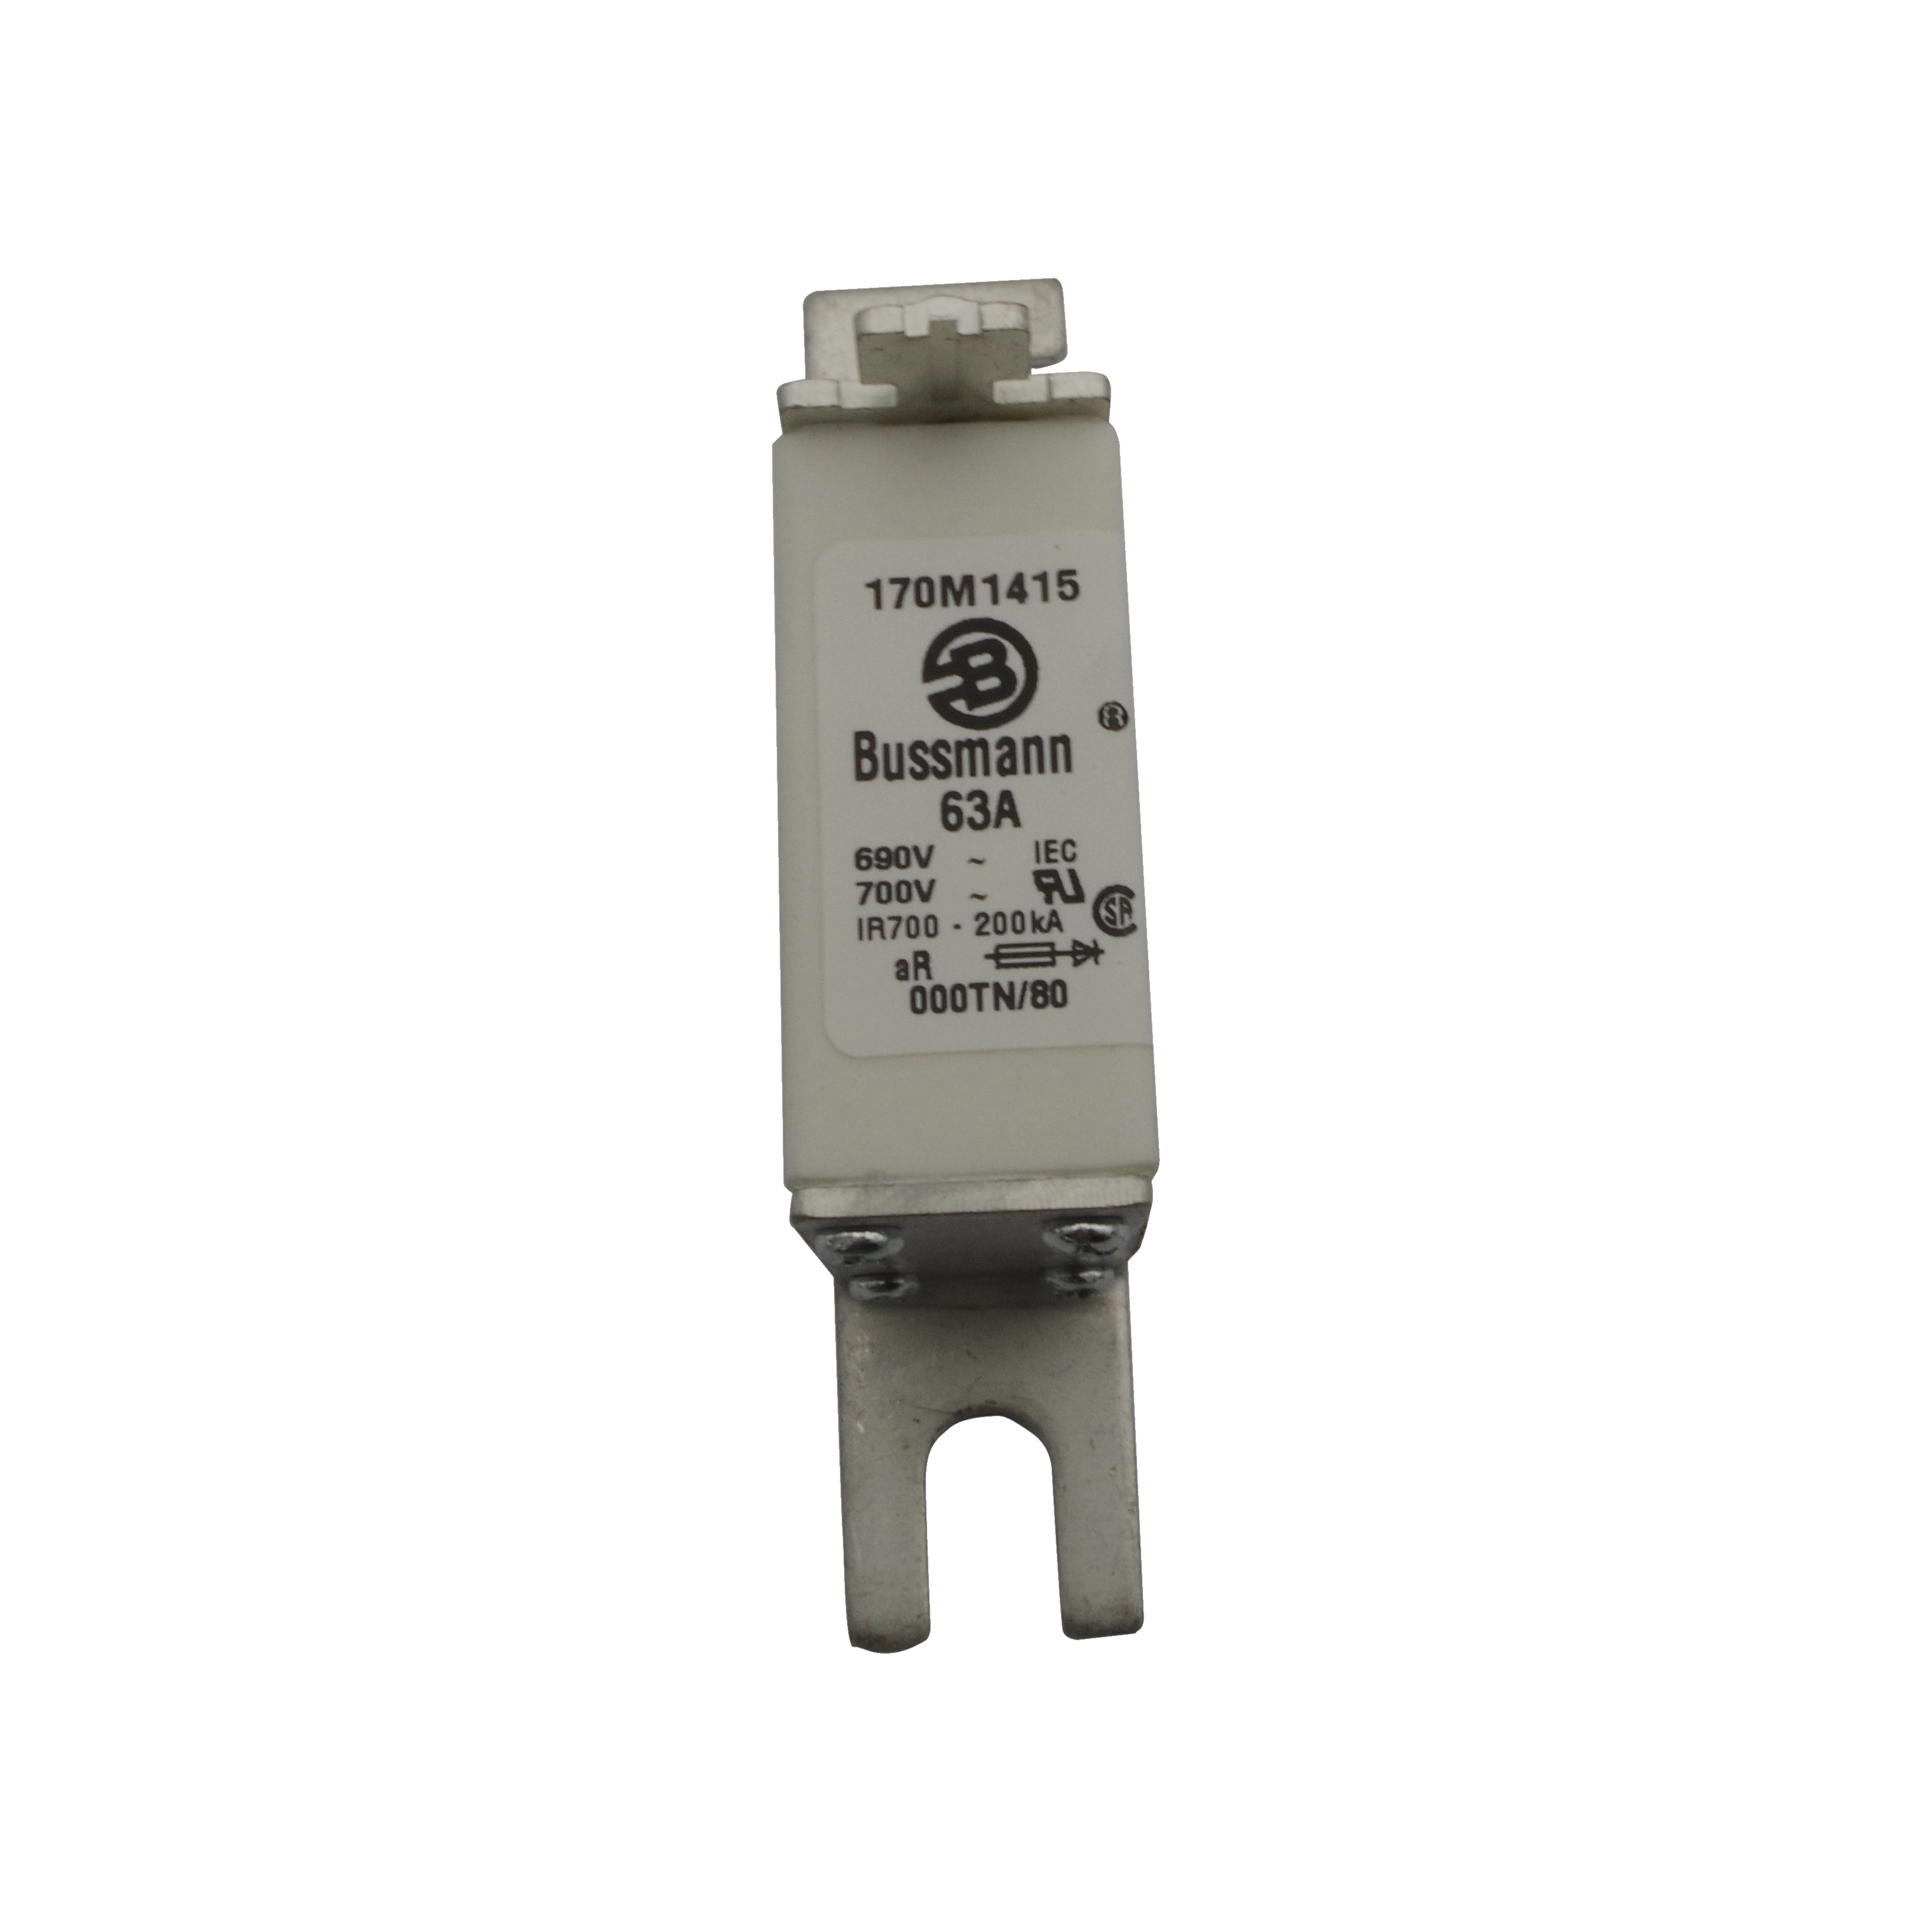 High Speed Square Body 63A 690V 170M1415 Fuse